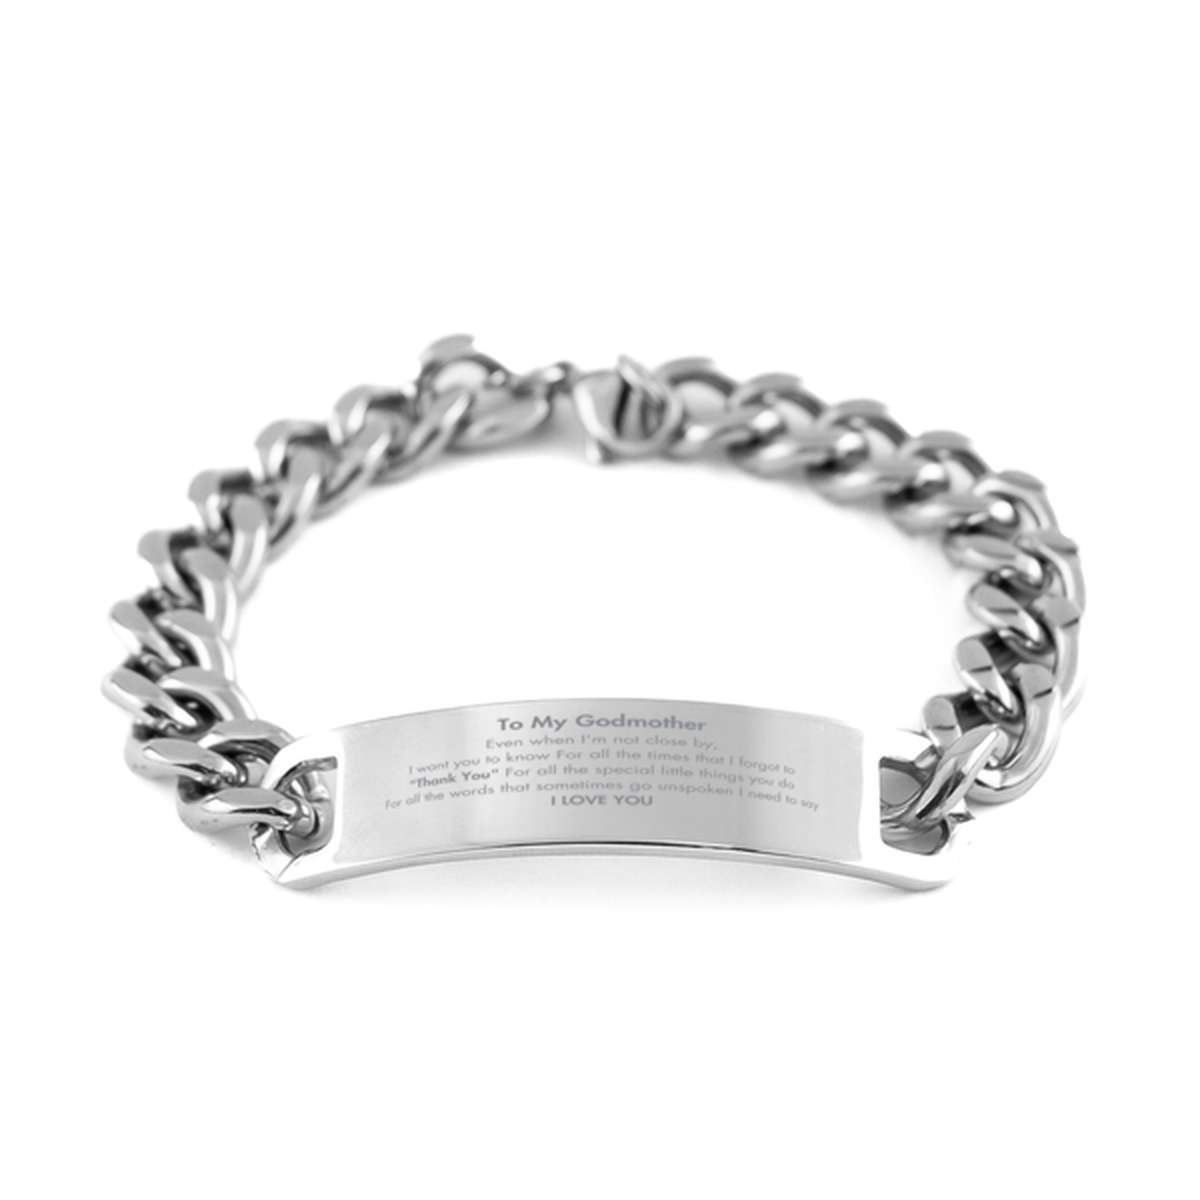 Thank You Gifts for Godmother, Keepsake Cuban Chain Stainless Steel Bracelet Gifts for Godmother Birthday Mother's day Father's Day Godmother For all the words That sometimes go unspoken I need to say I LOVE YOU